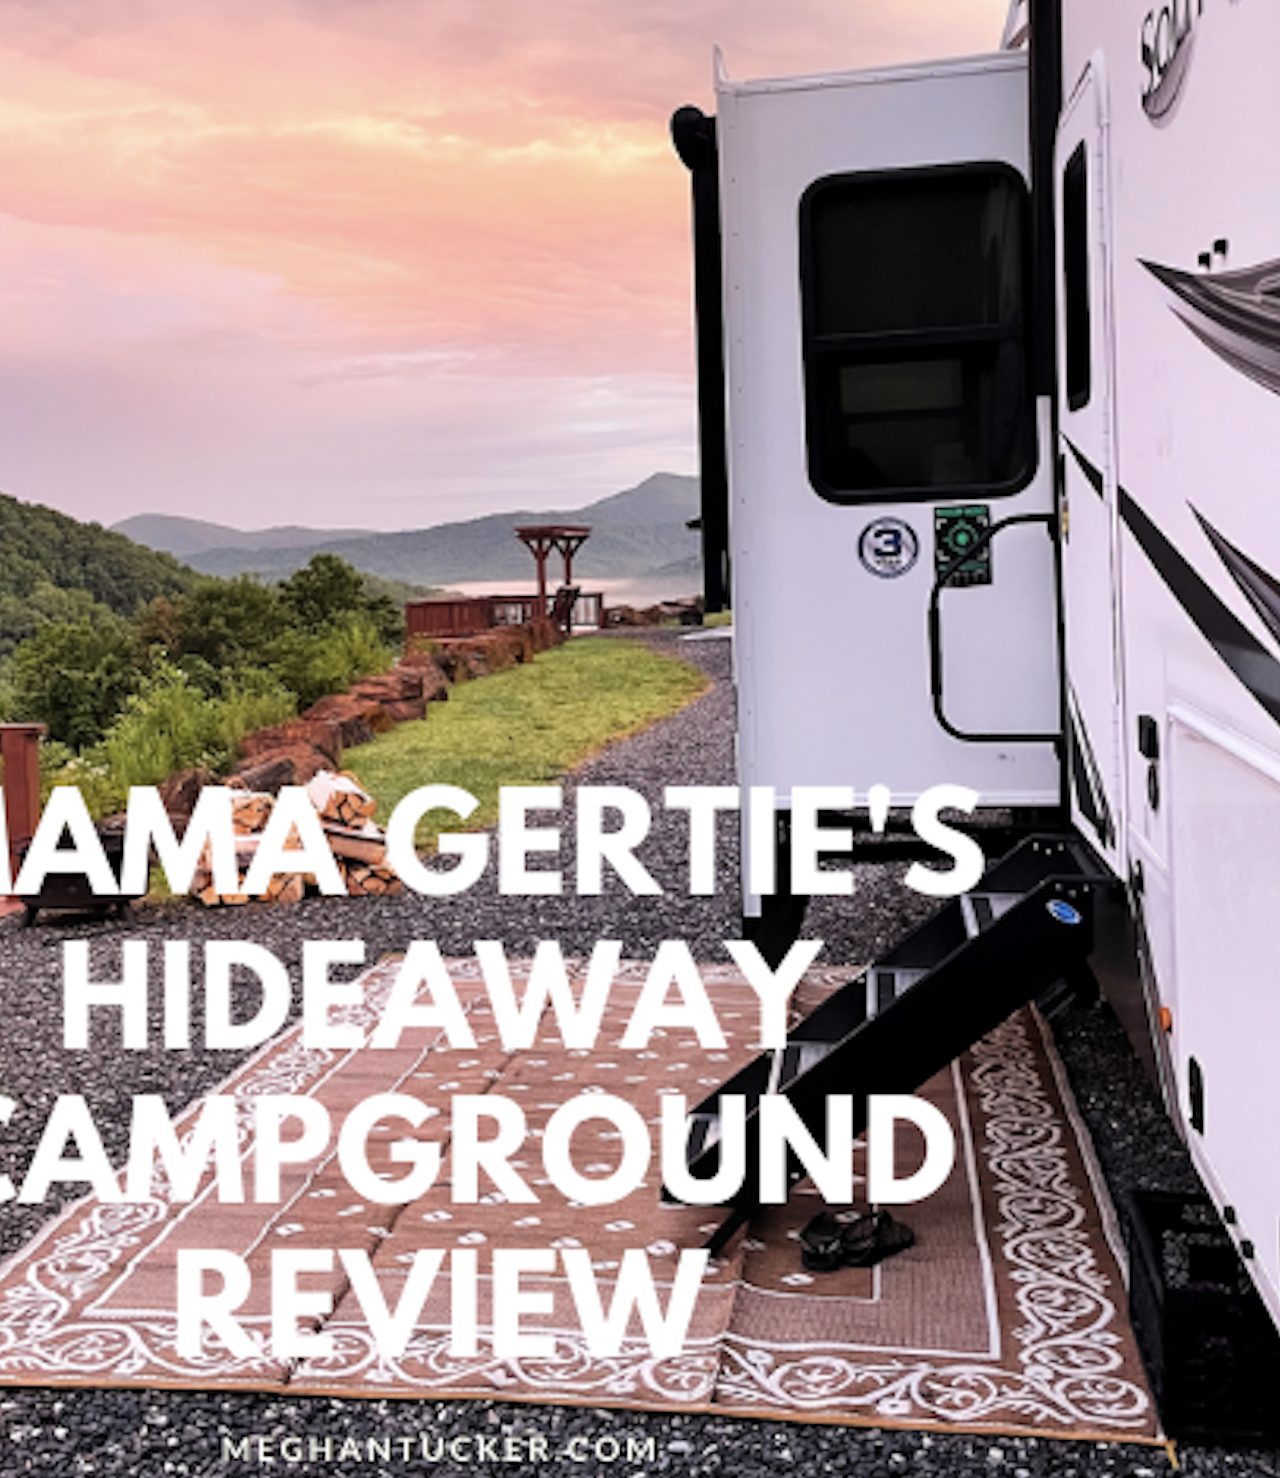 Mama Gertie’s Hideaway Campground Review